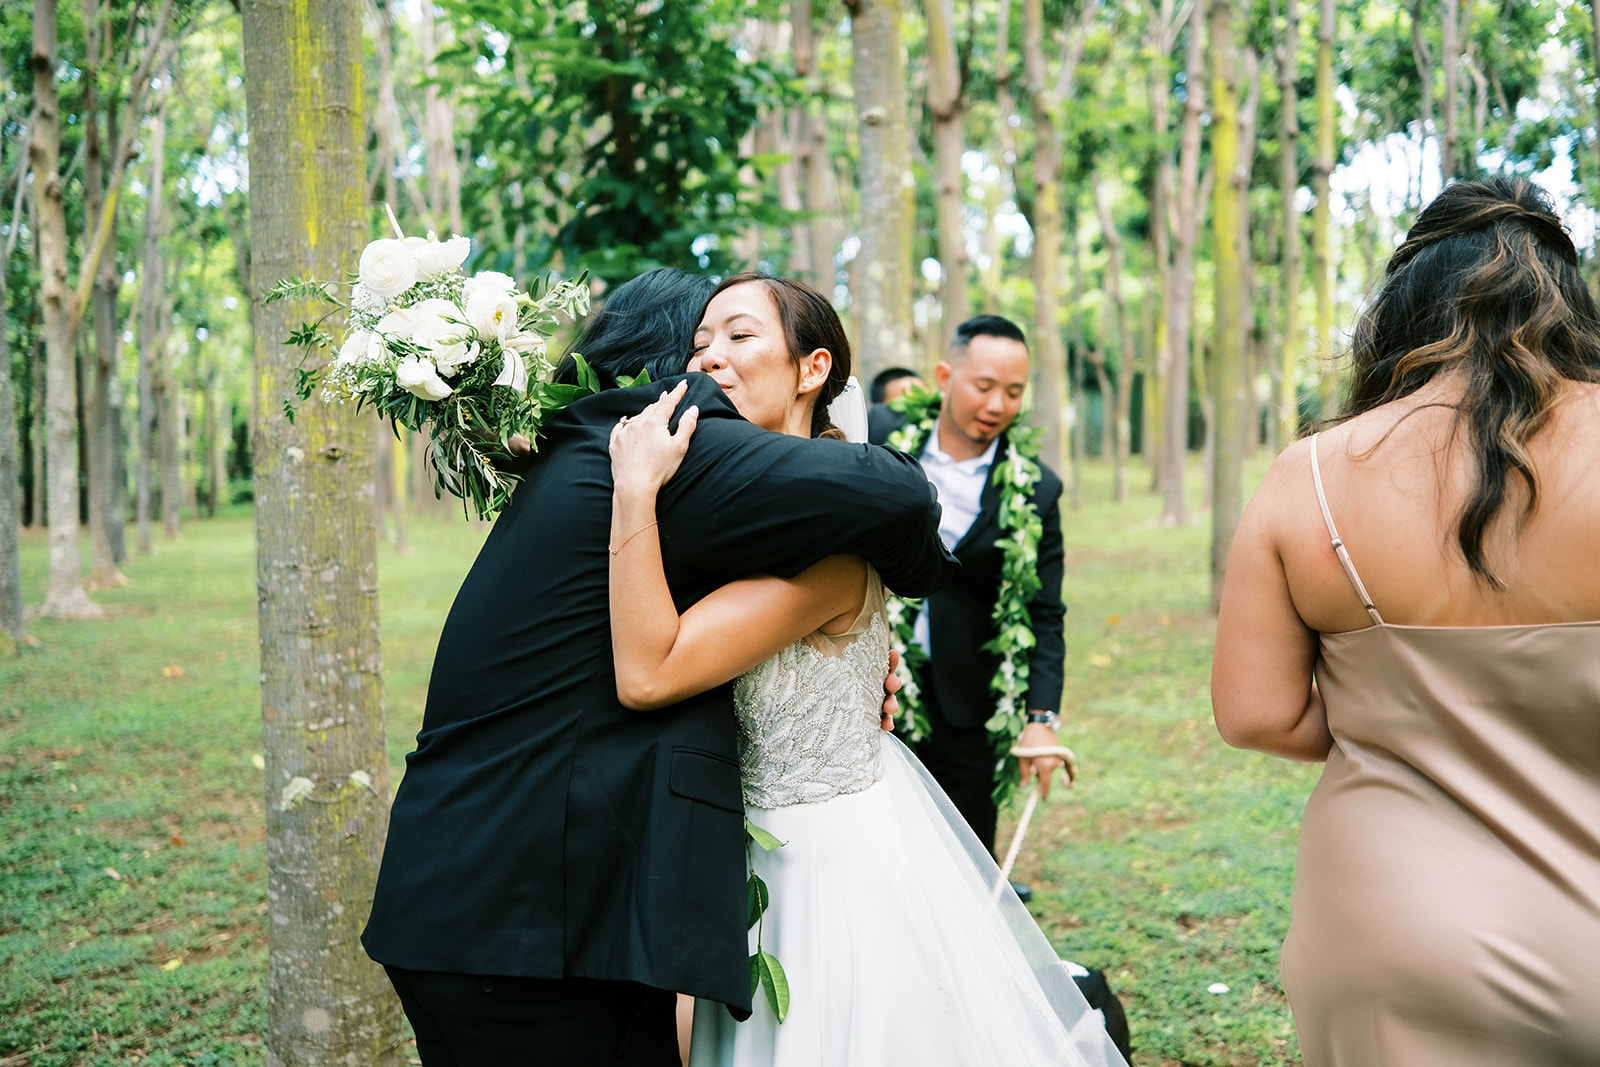 Wedding guest embracing a smiling bride in a forested area captured by Oahu Wedding Photographer